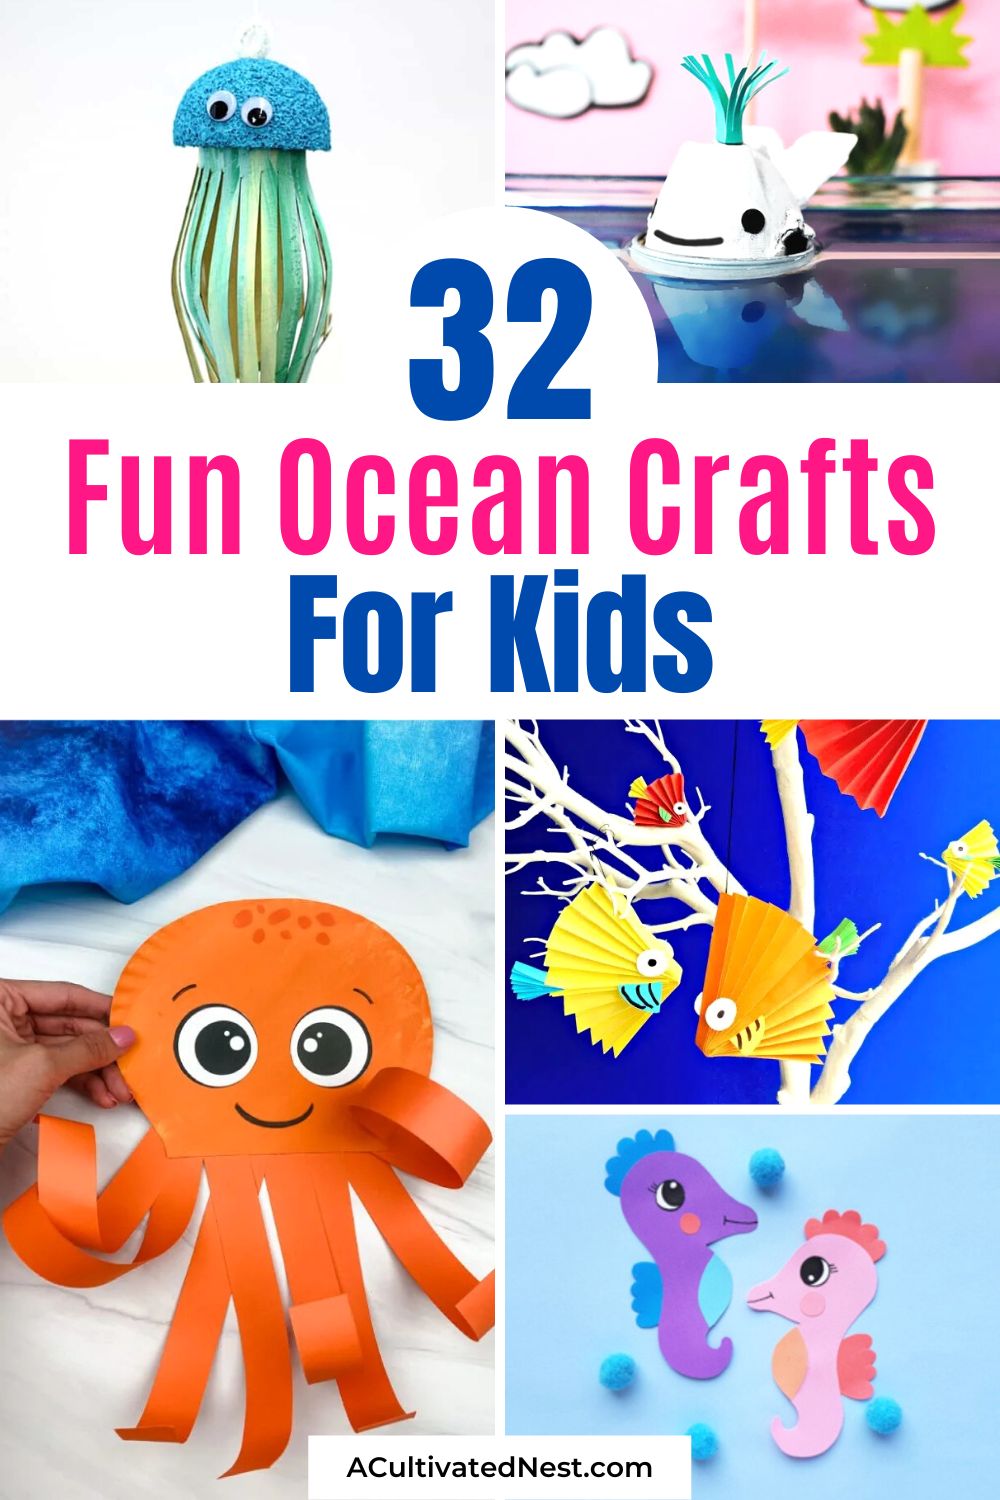 32 Fun Ocean Crafts for Kids- If your kids love the sea or beach, then they'll love doing these fun ocean crafts for kids! There are so many fun animals they can make! | ocean animal crafts, #kidsCrafts #kidsActivities #activitiesForKids #oceanCrafts #ACultivatedNest